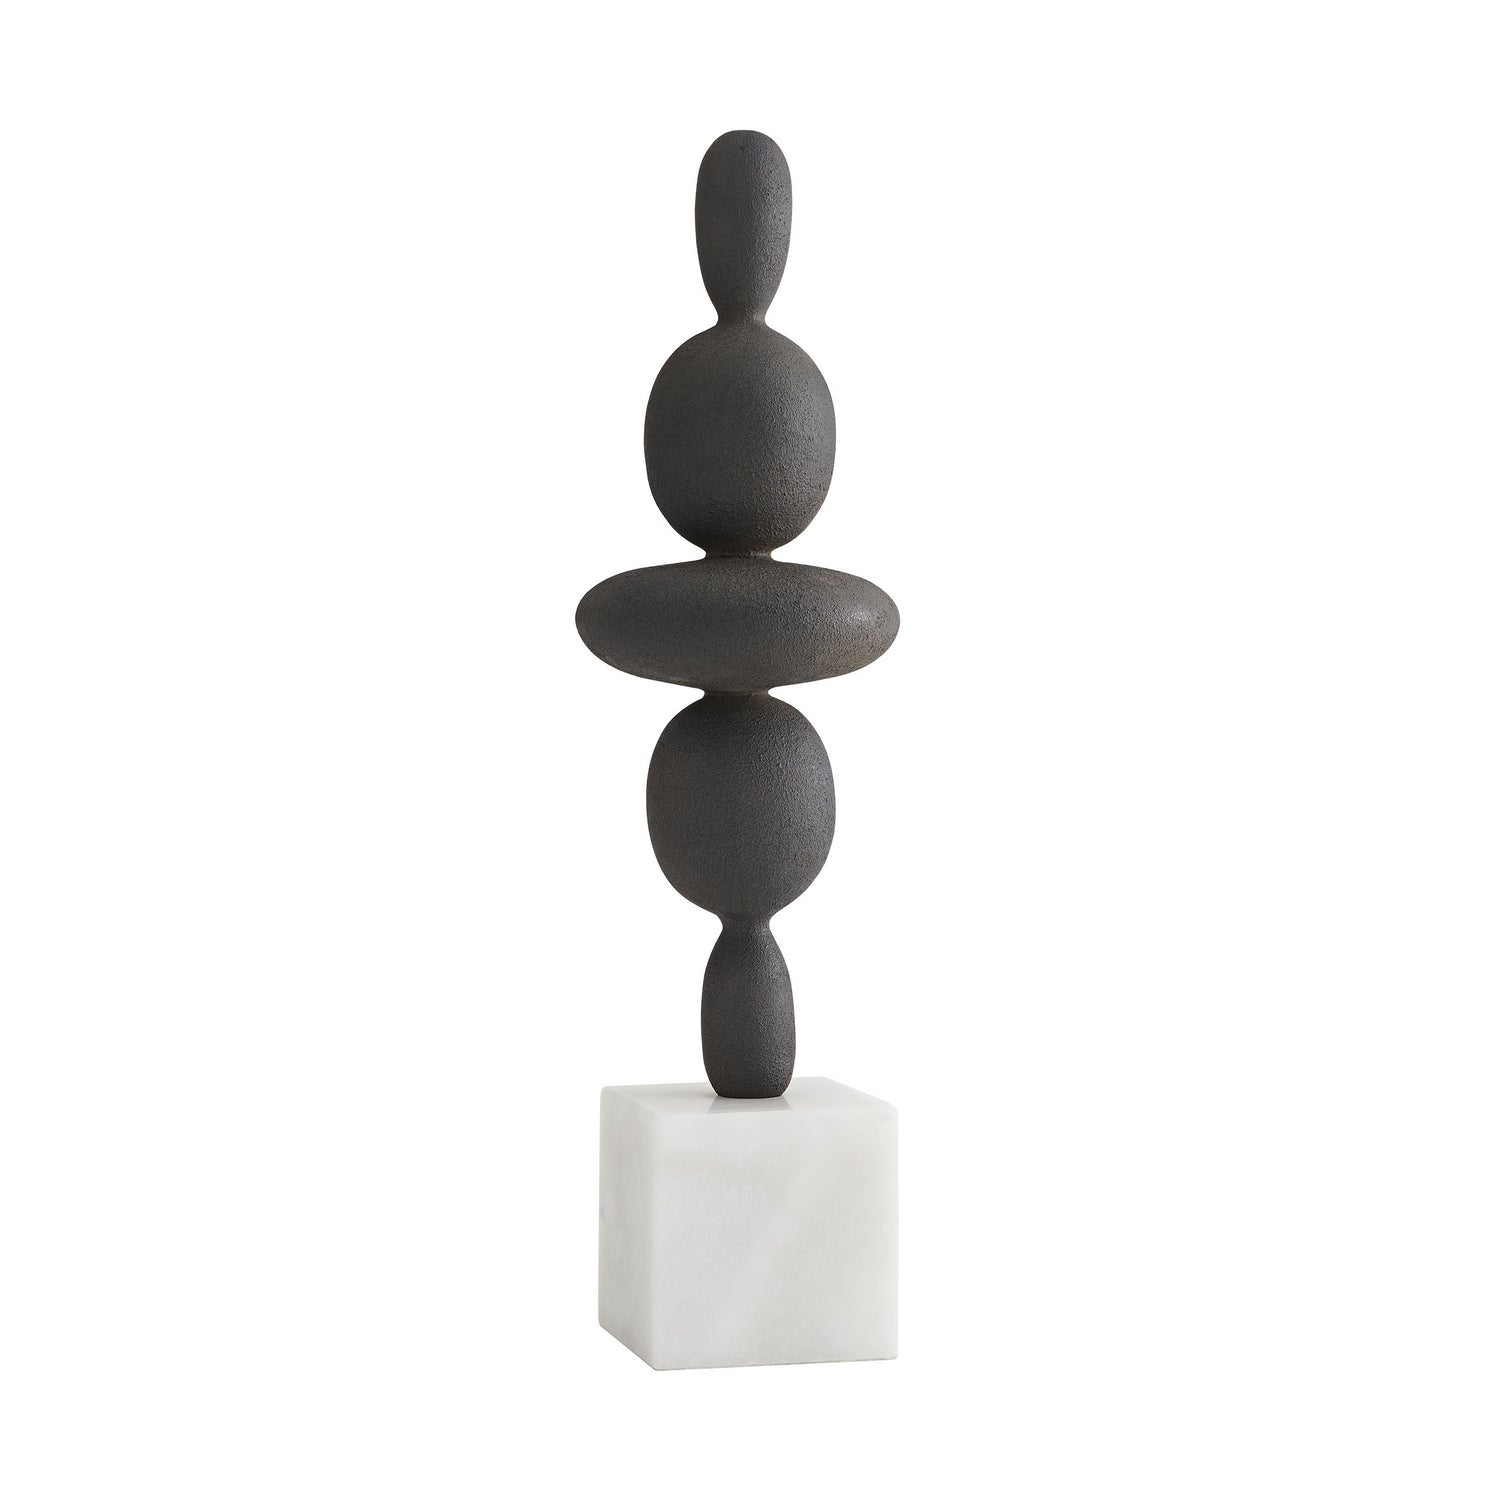 Sculpture from the Eddie collection in Charcoal finish